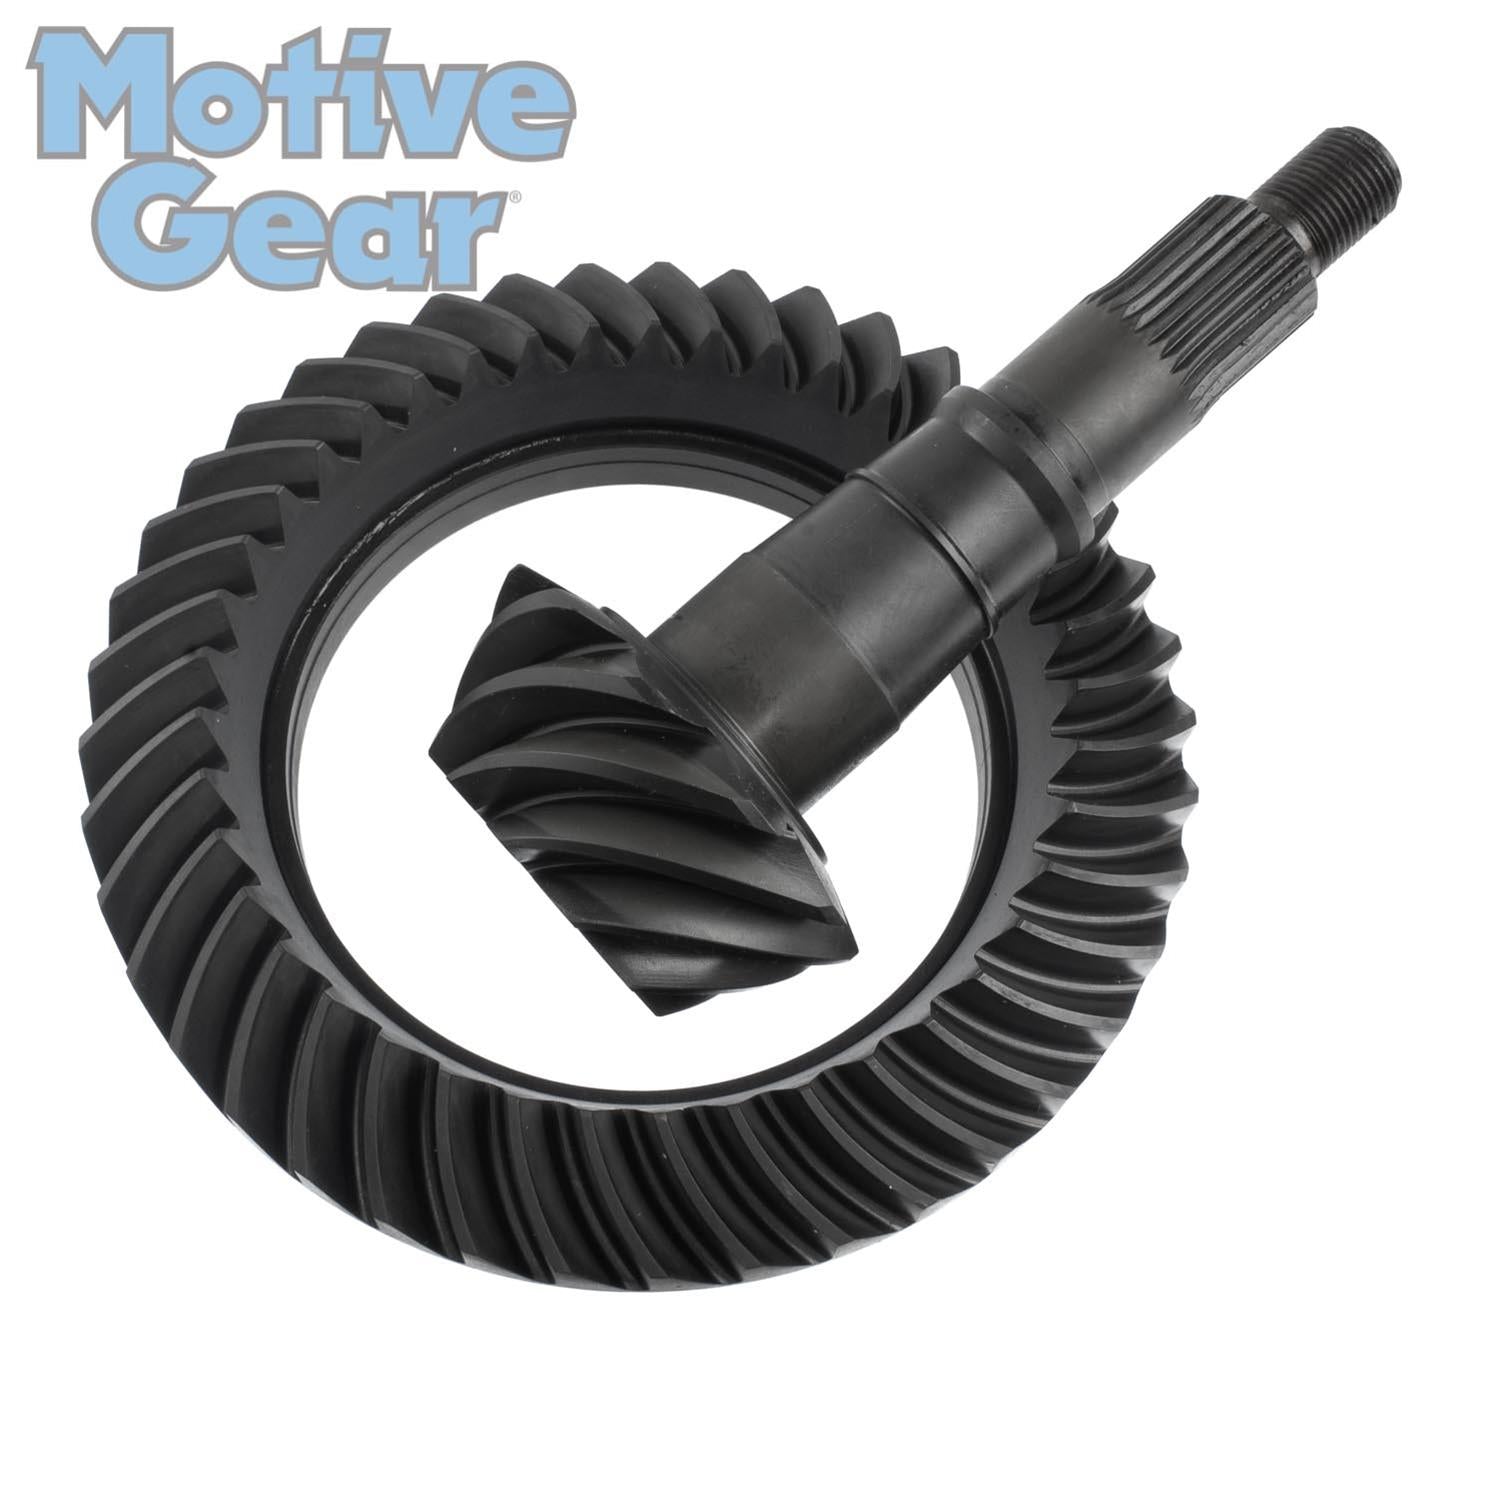 Motive Gear C9.25-373F-1 3.73 Ratio Differential Ring and Pinion for 9.25 (Inch) (14 Bolt)